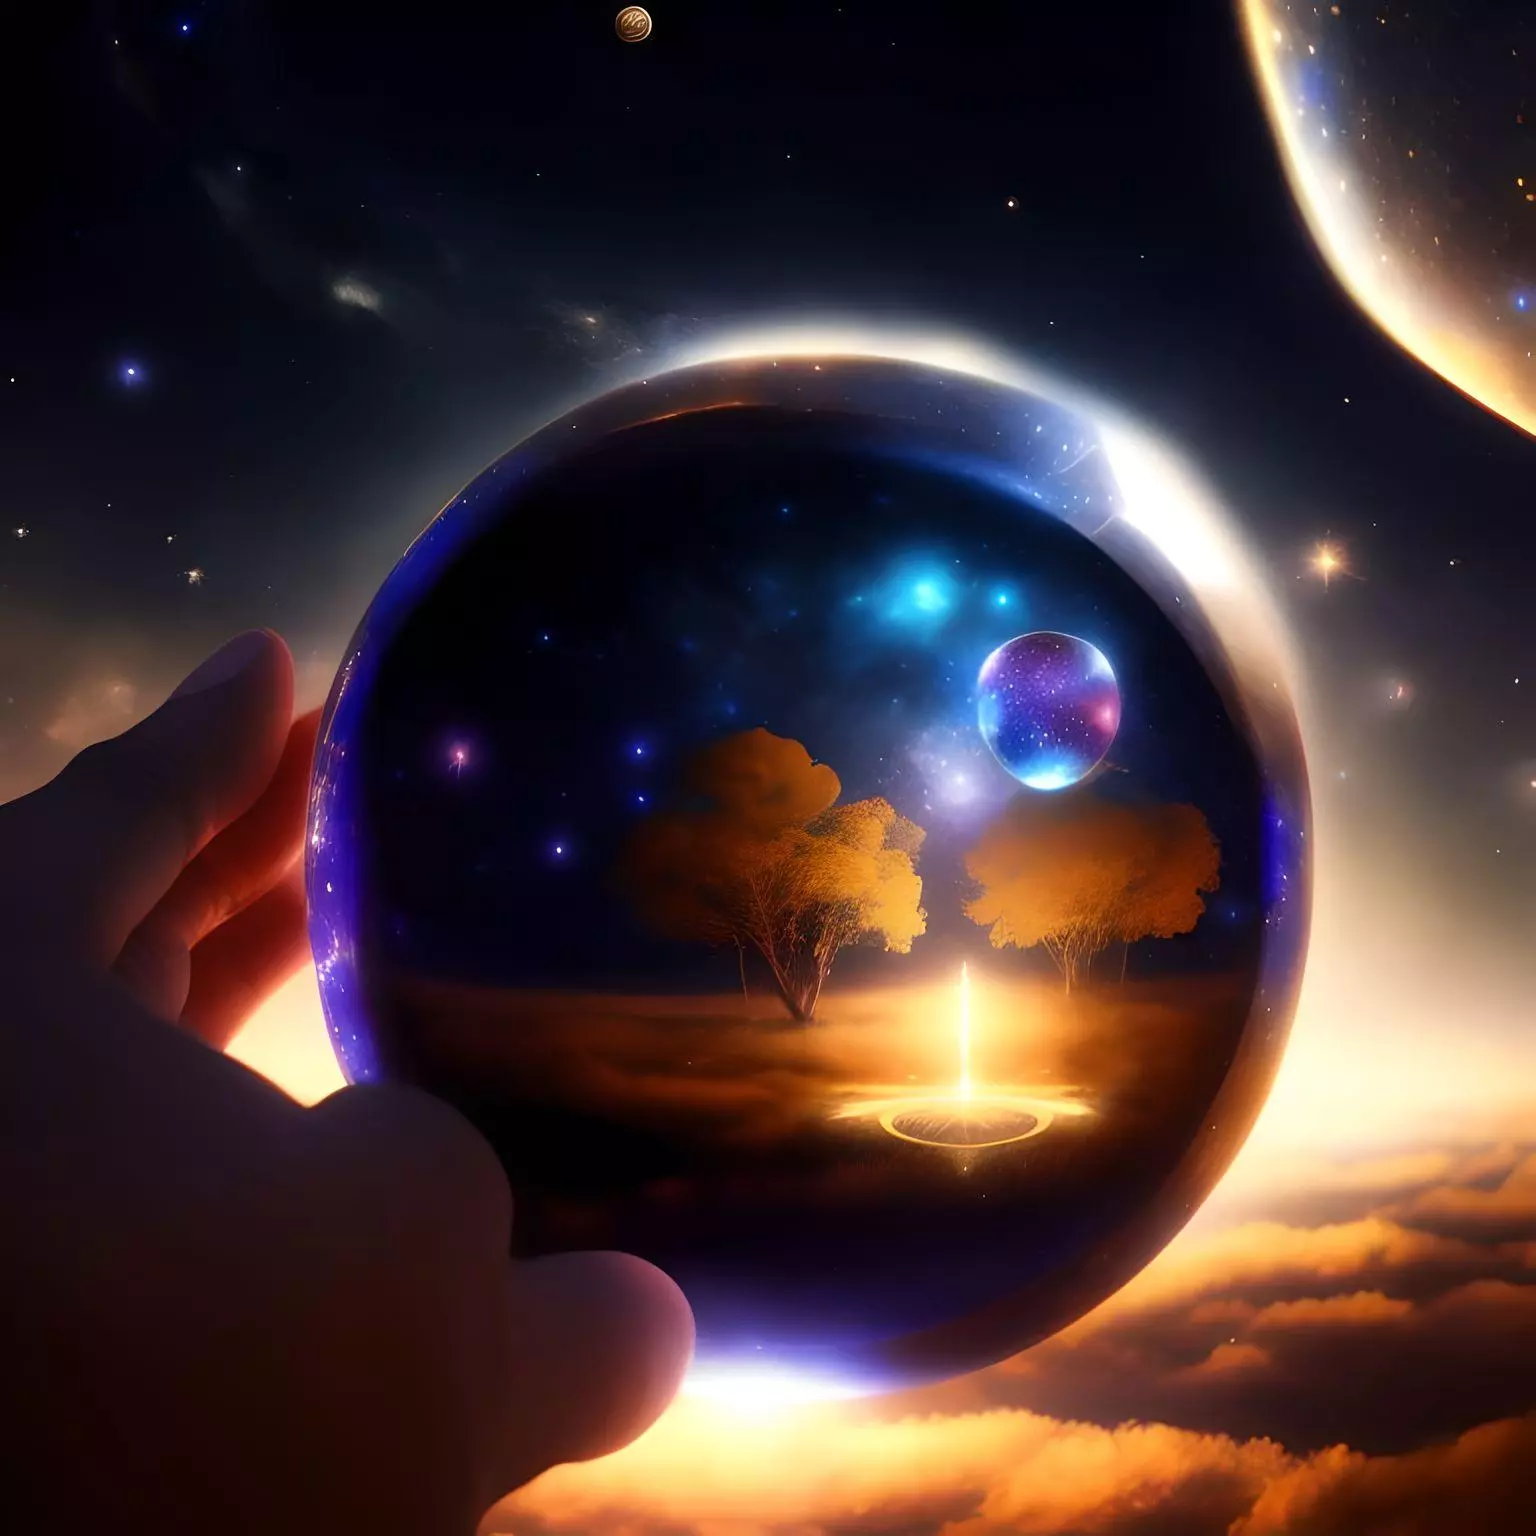 cosmic ball with light and a tree growing inside of it